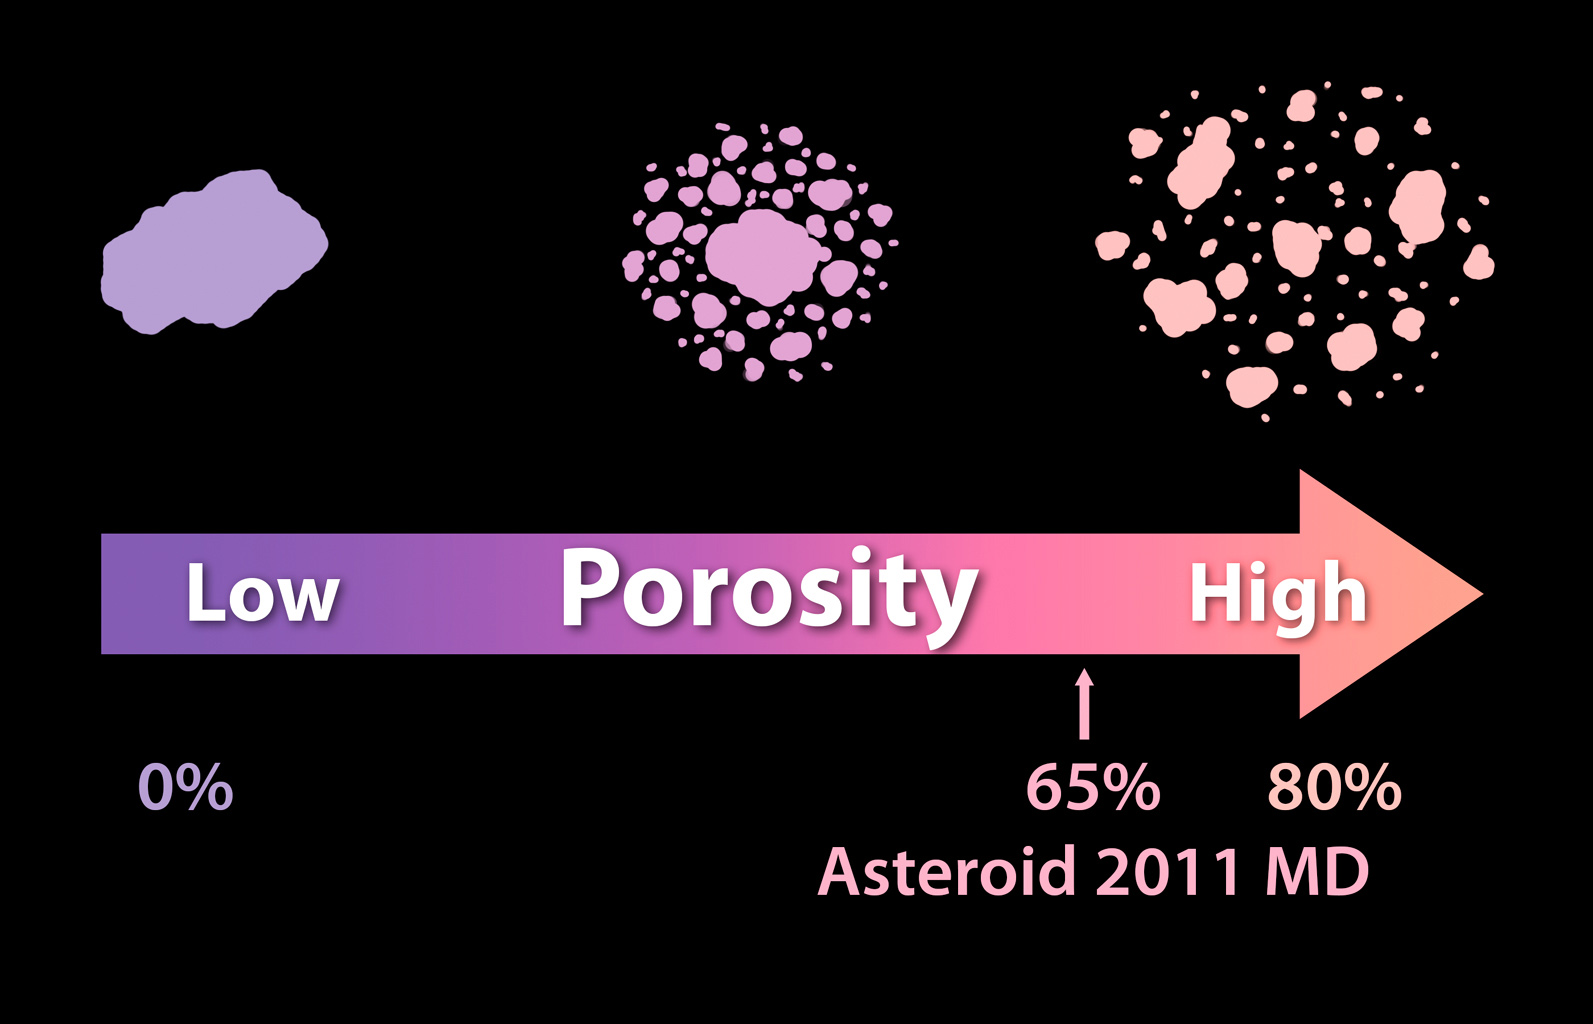 Space Images | Solid as a Rock? Porosity of Asteroids1593 x 1024